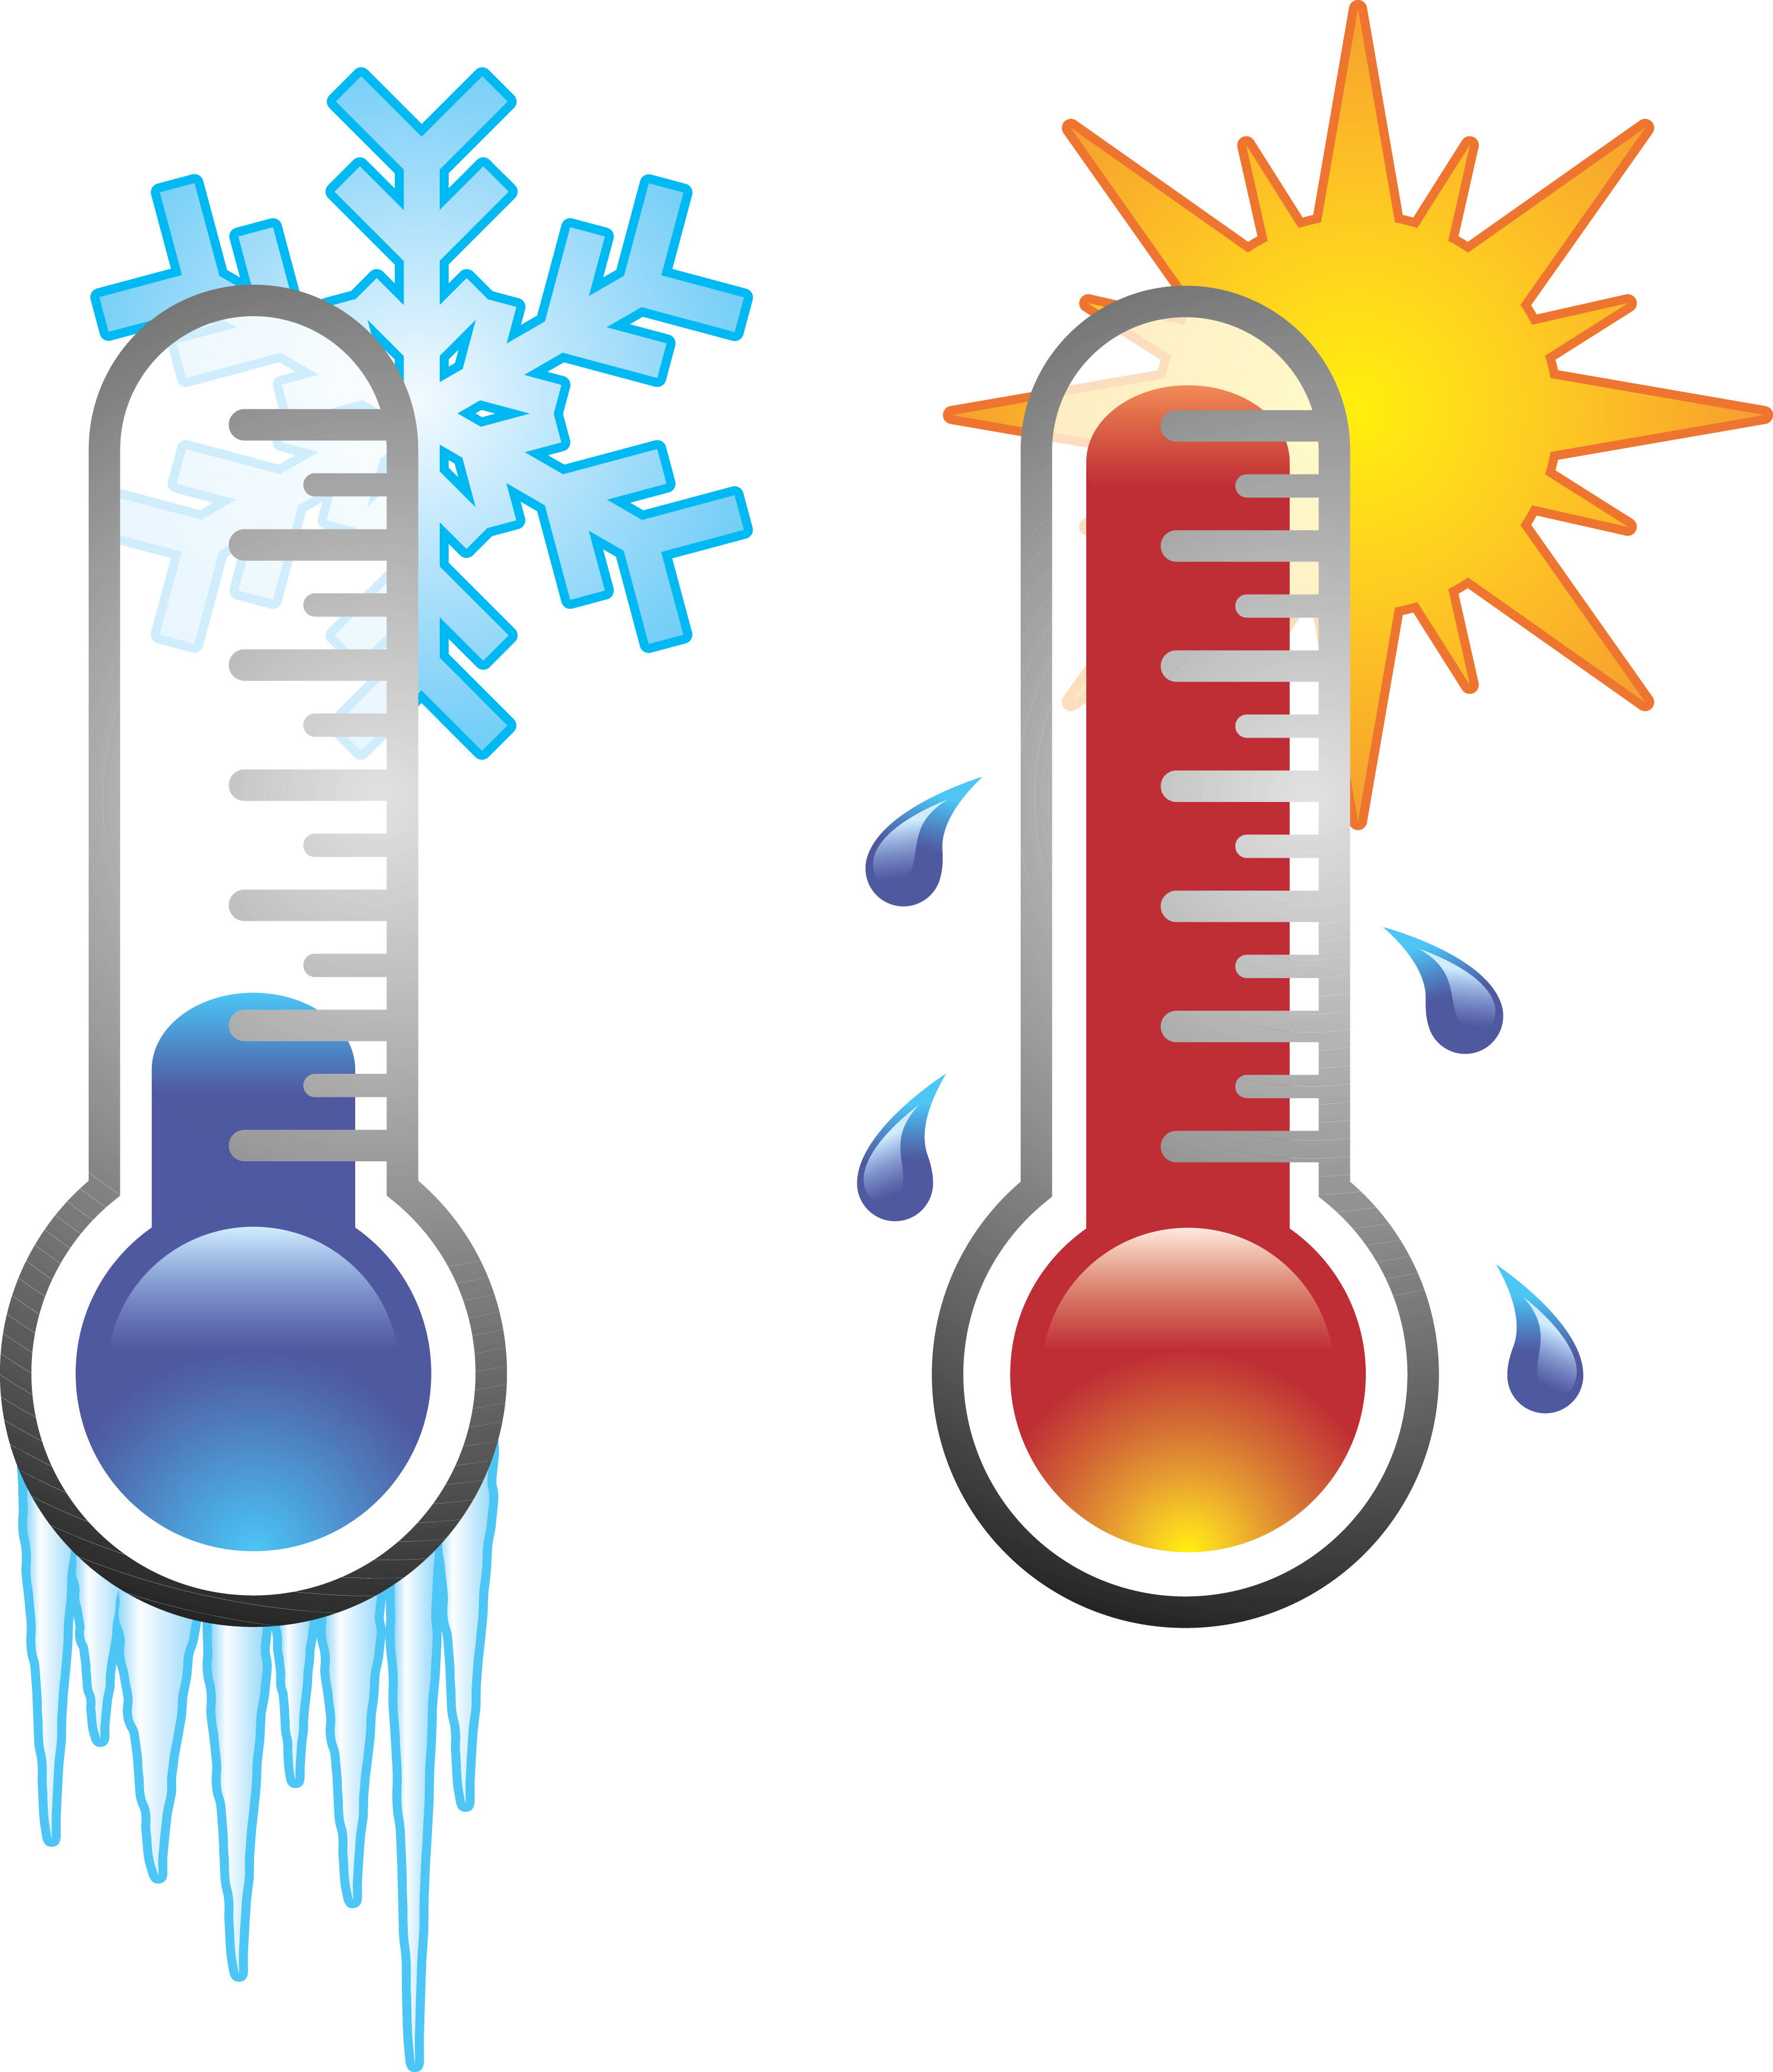 Blank thermometer templates clipart clipartix 2 - Cliparting.com